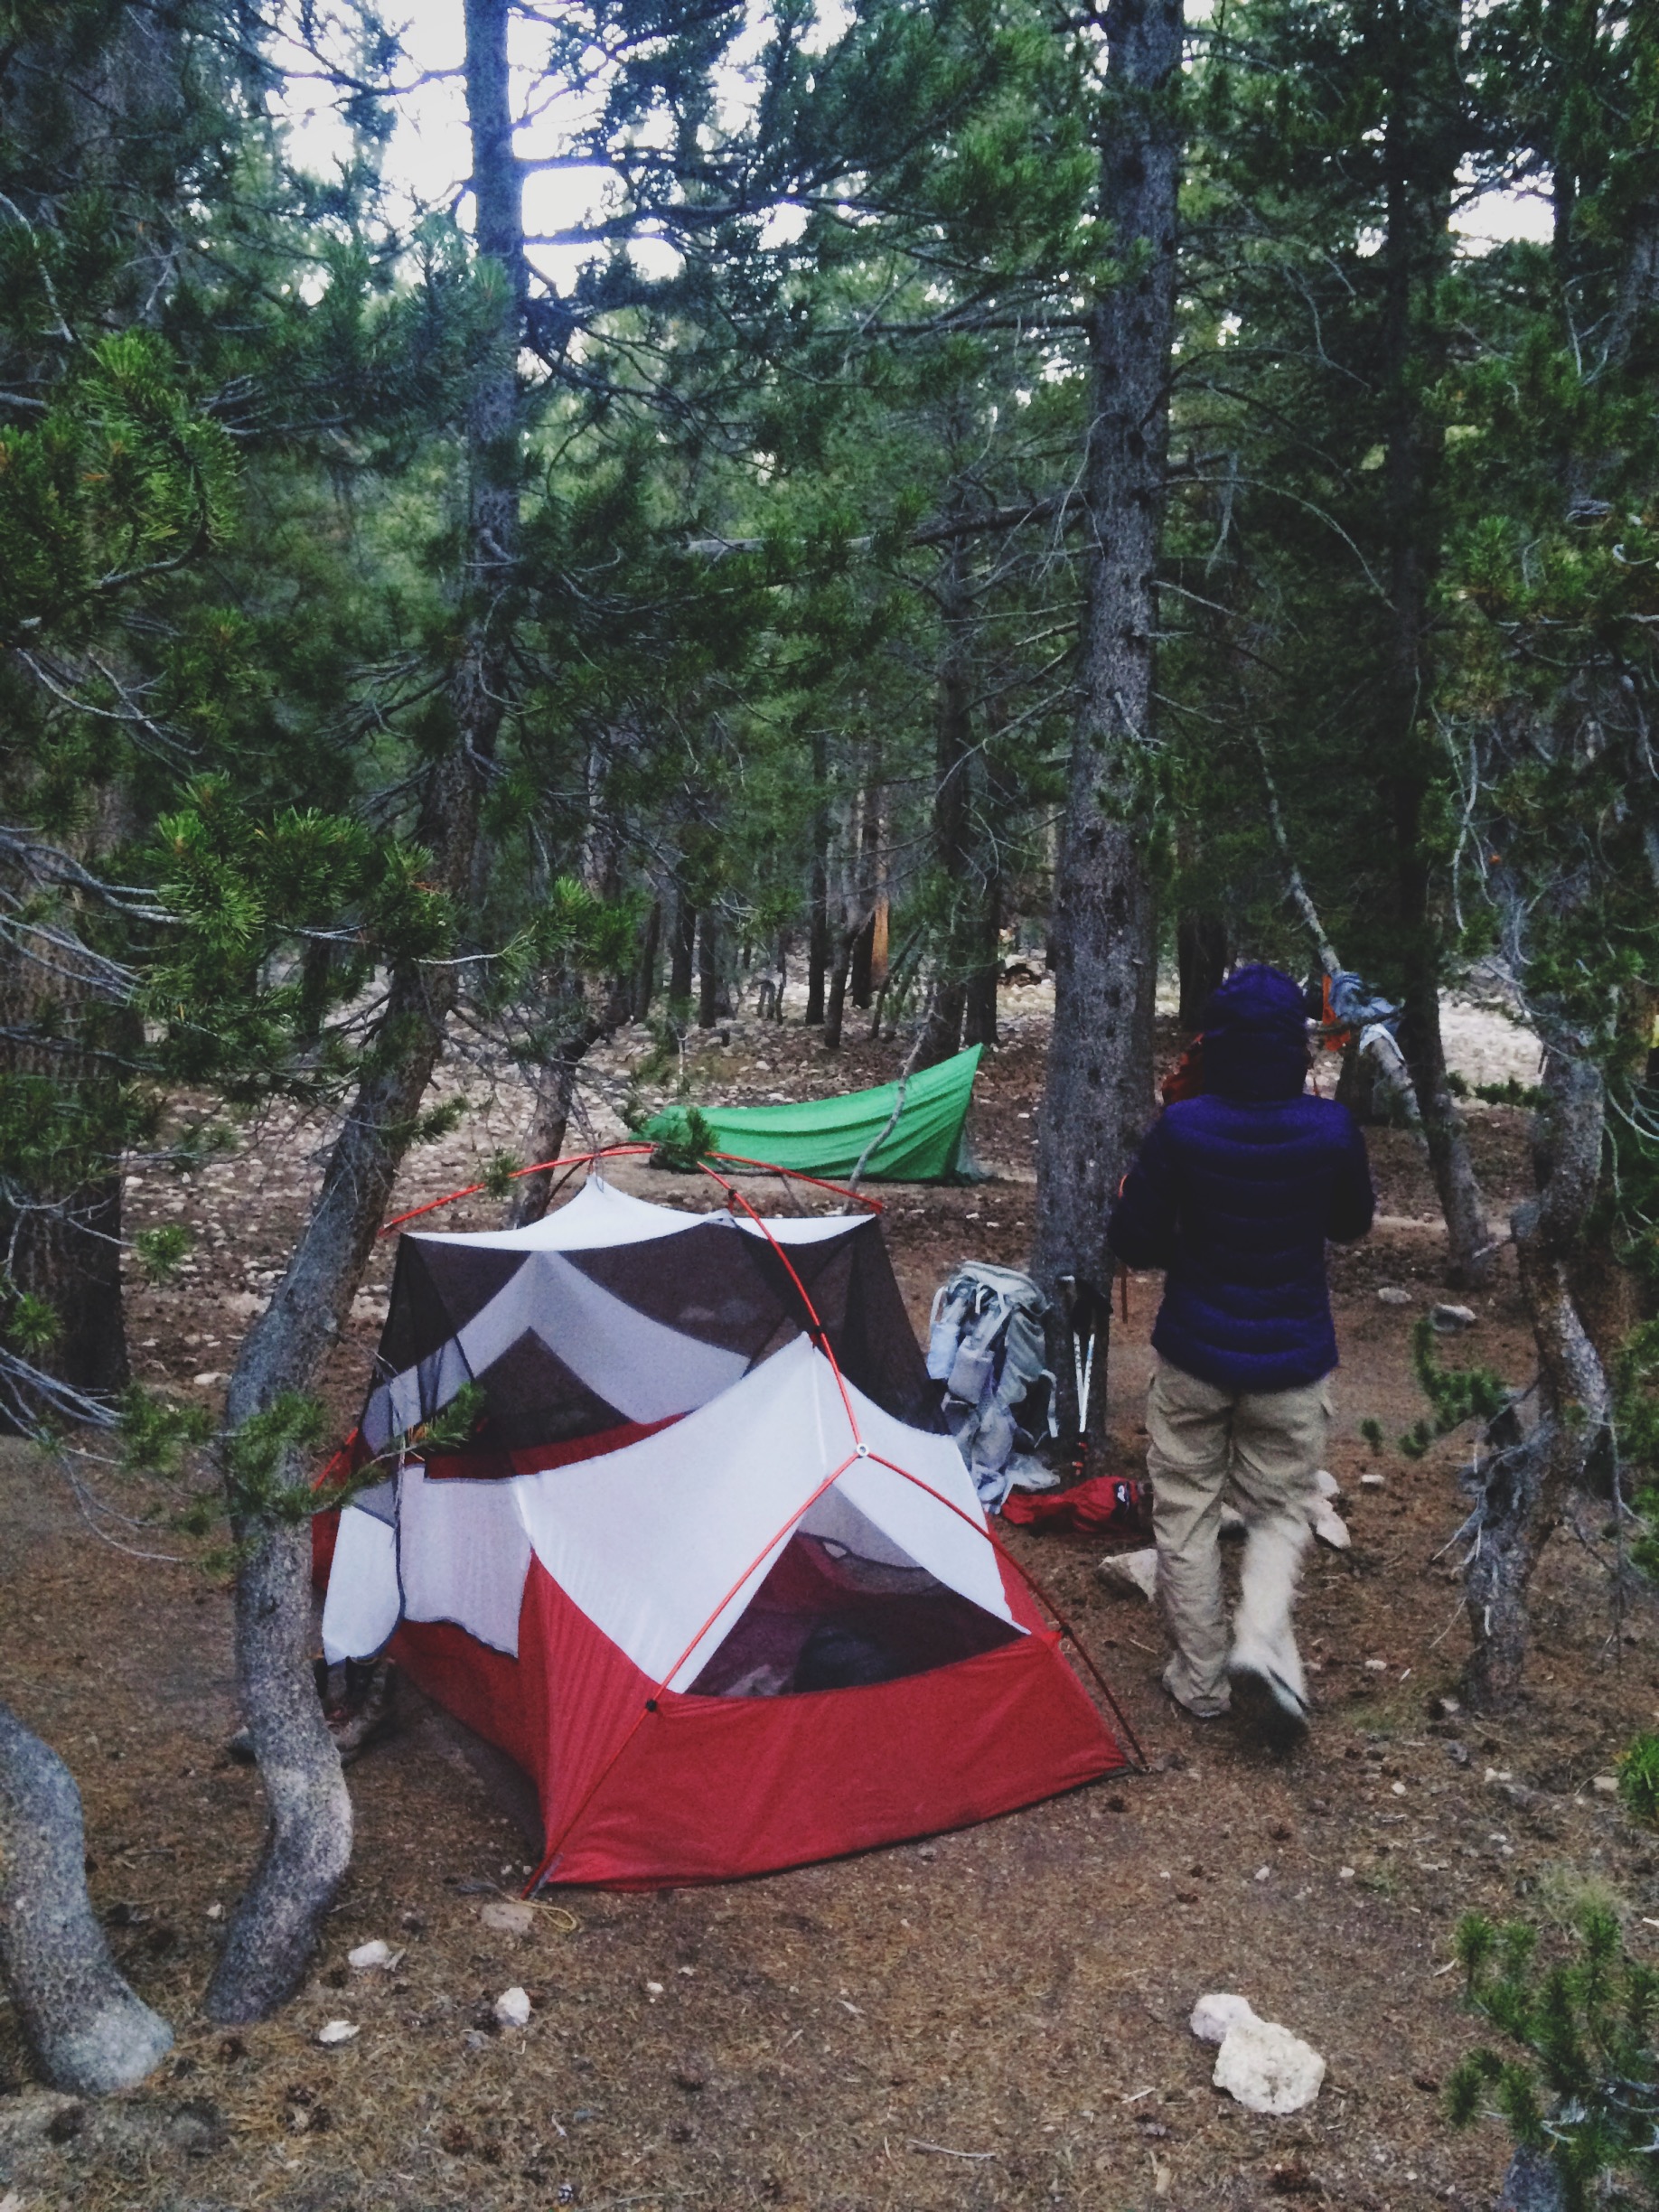  Day 15: camped at Lower Vidette Meadow. 